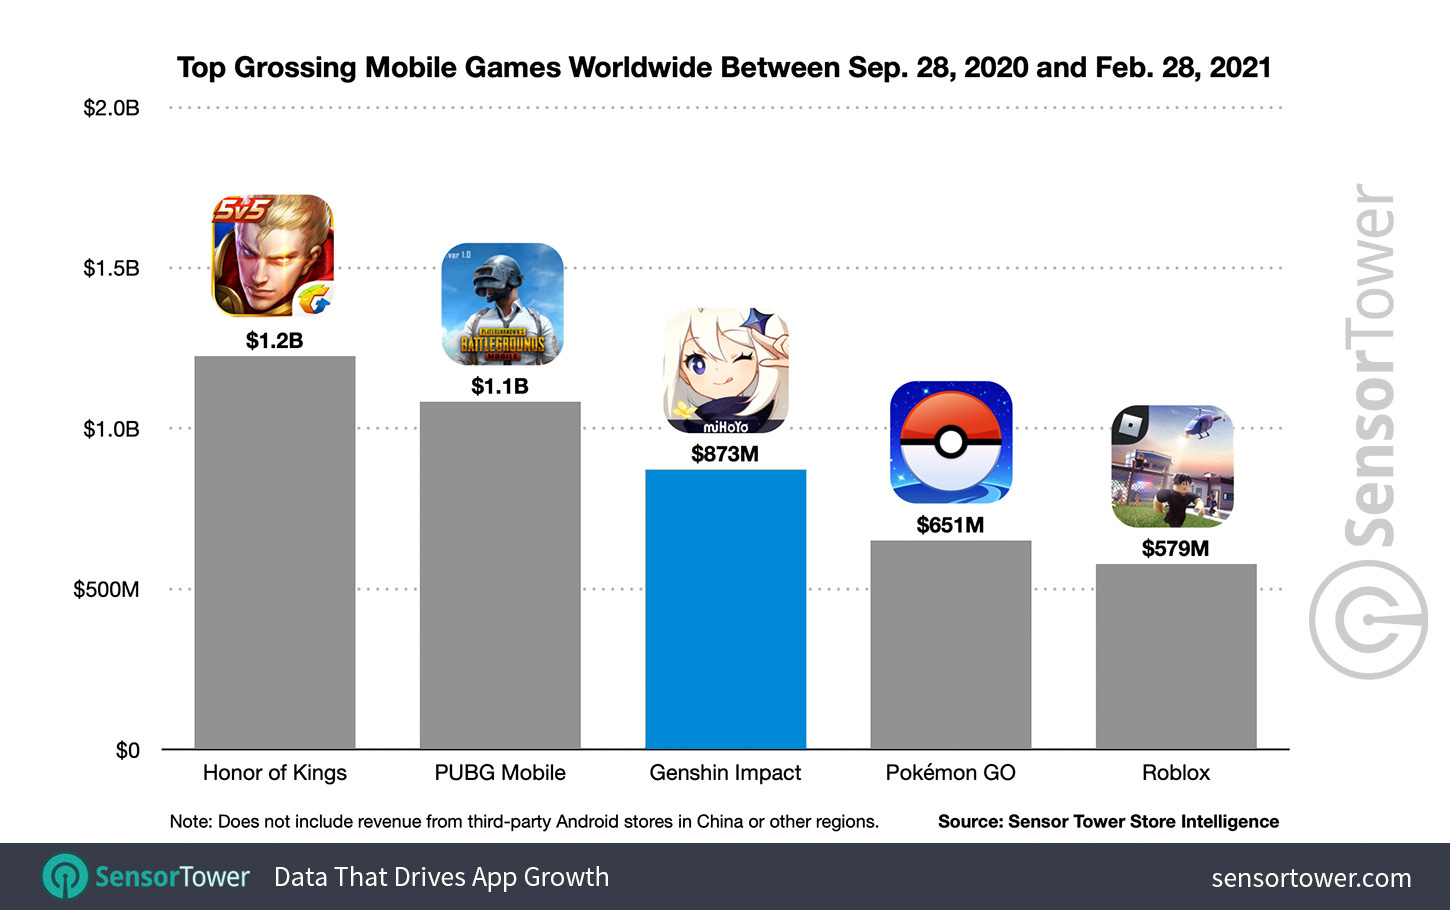 Top Grossing Mobile Games Worldwide Between September 28, 2020 and February 28, 2021